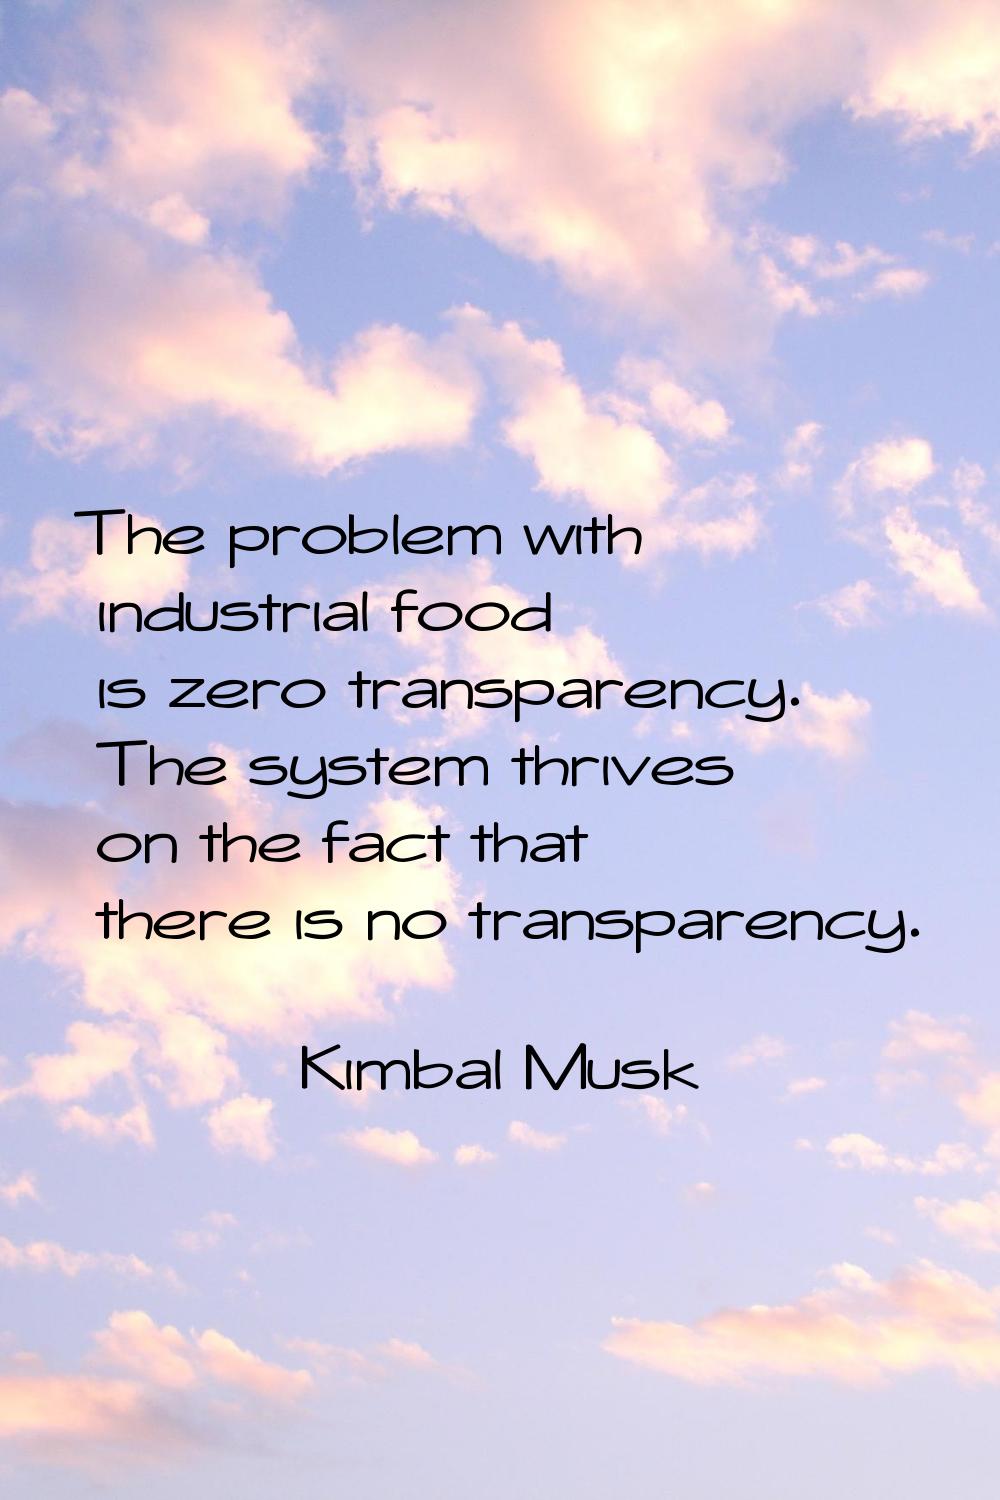 The problem with industrial food is zero transparency. The system thrives on the fact that there is